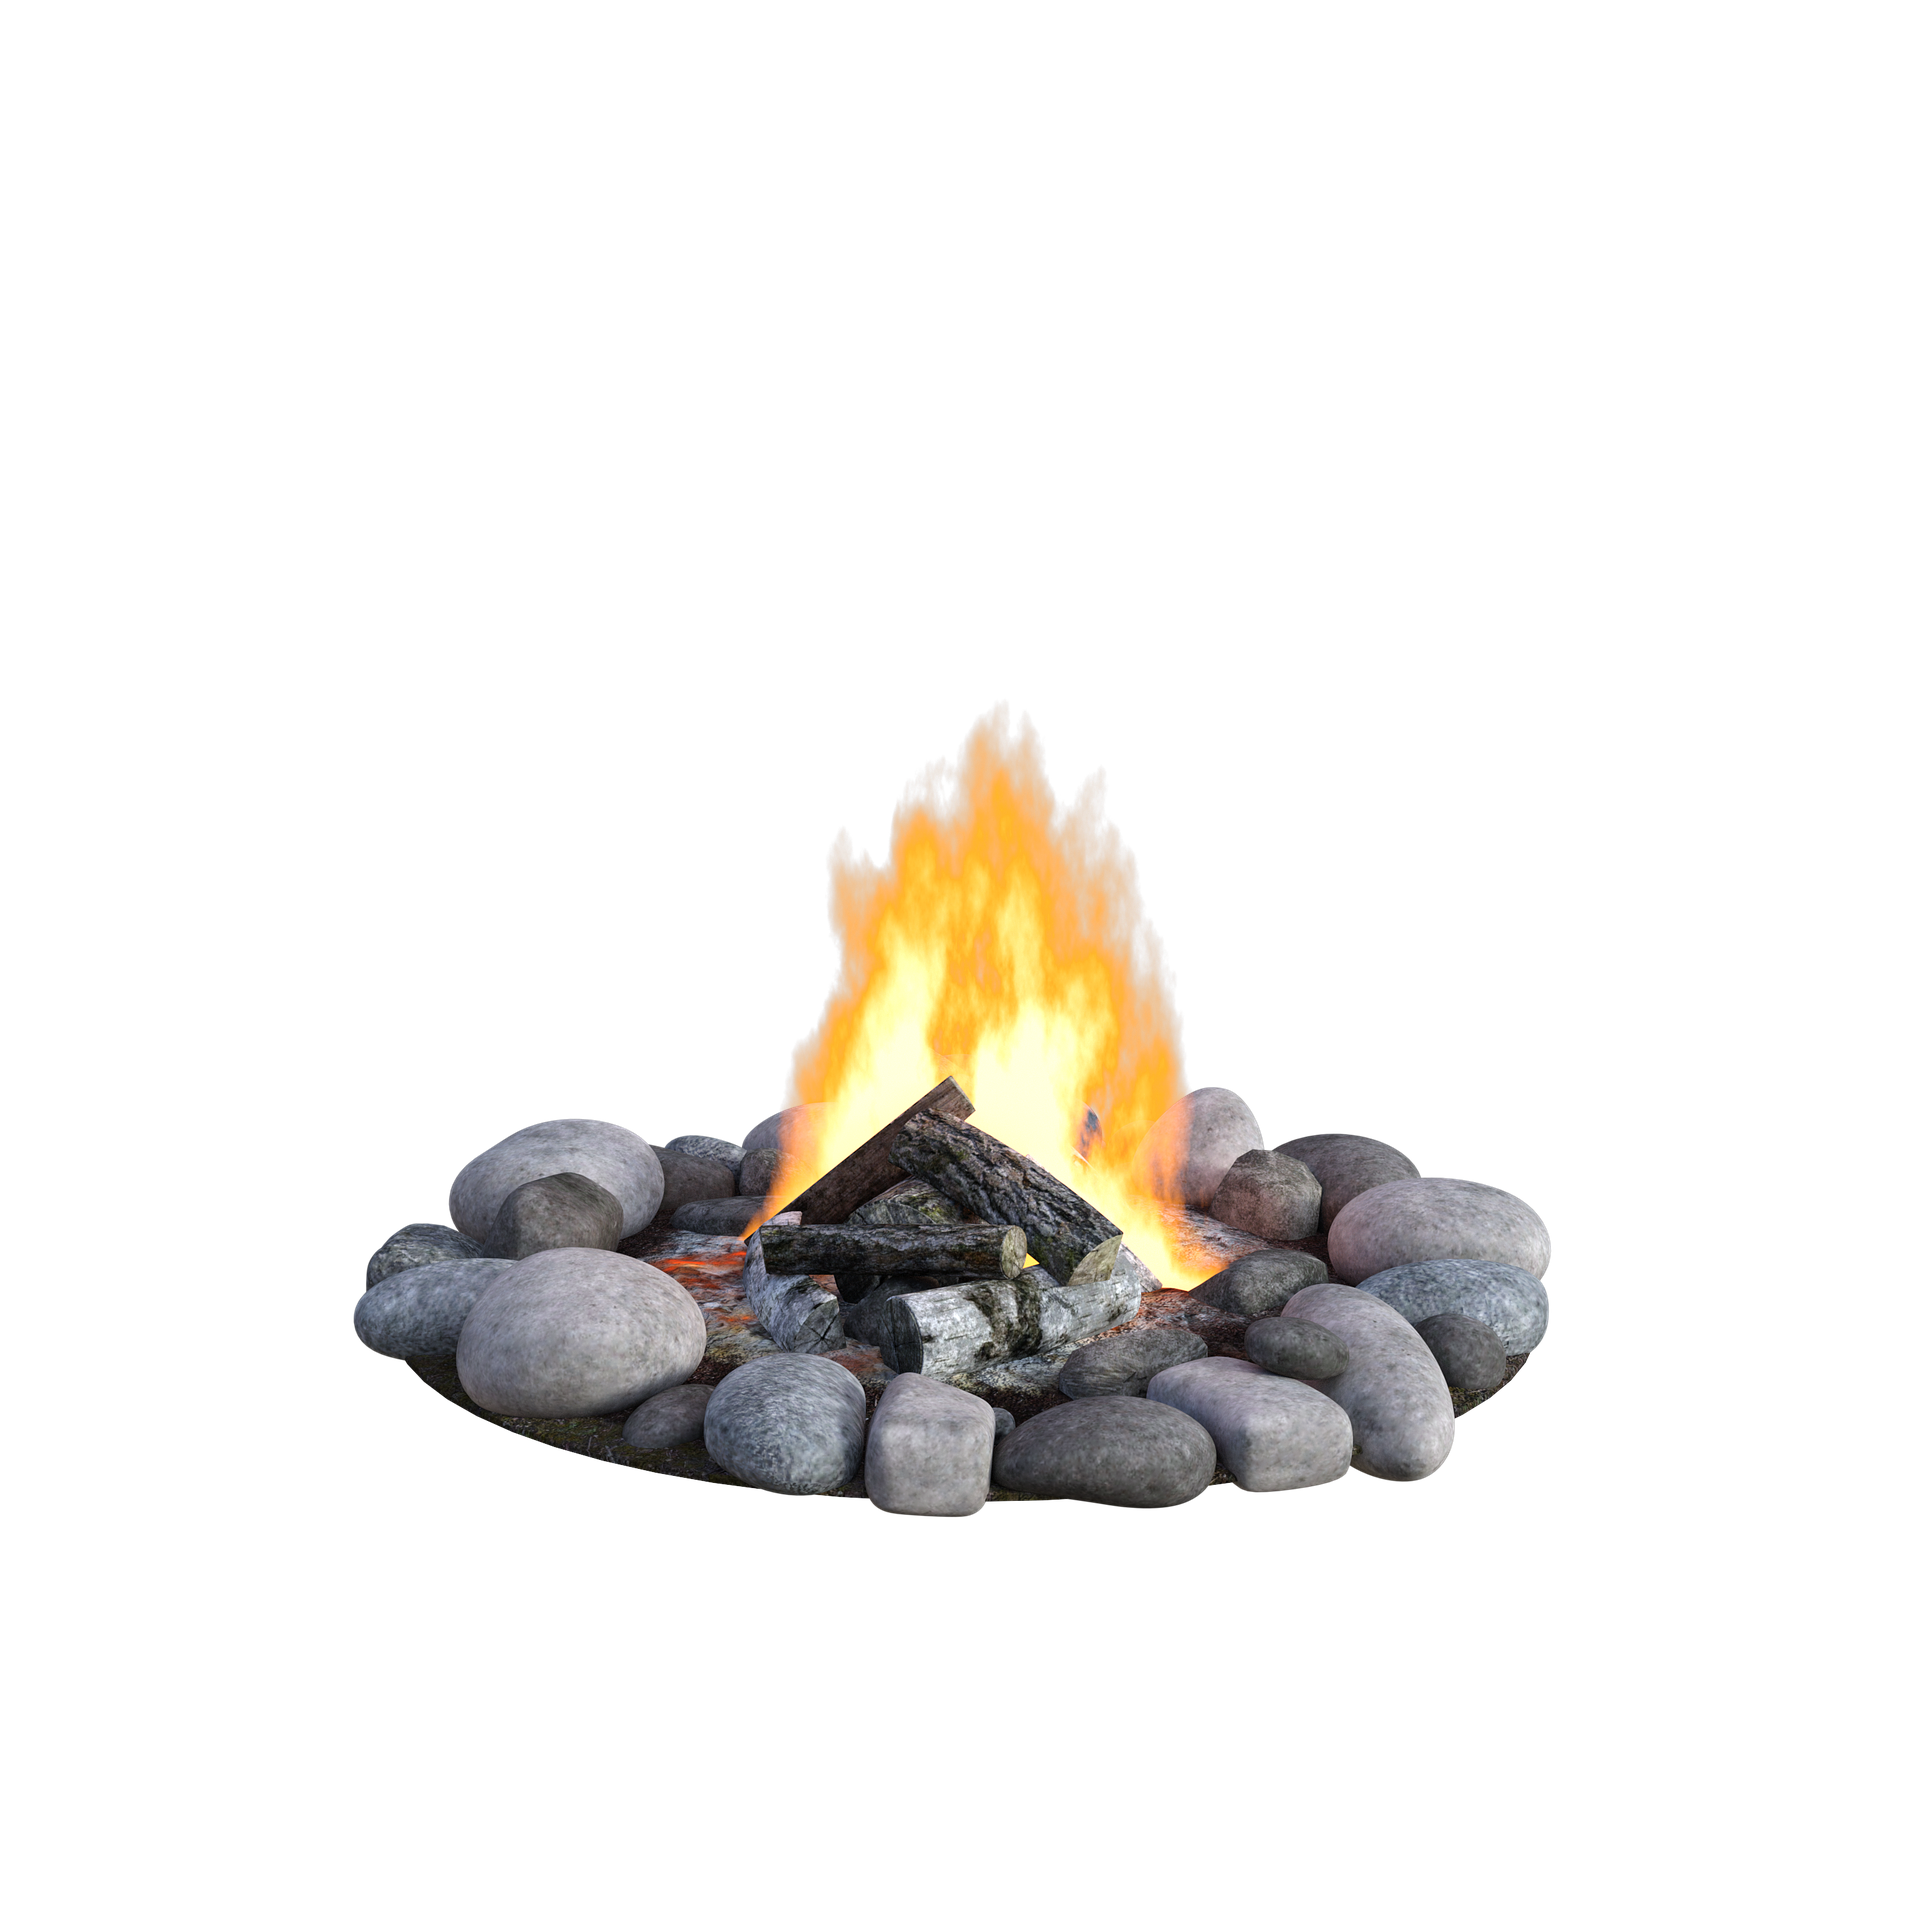 campfire-3986678_1920.png